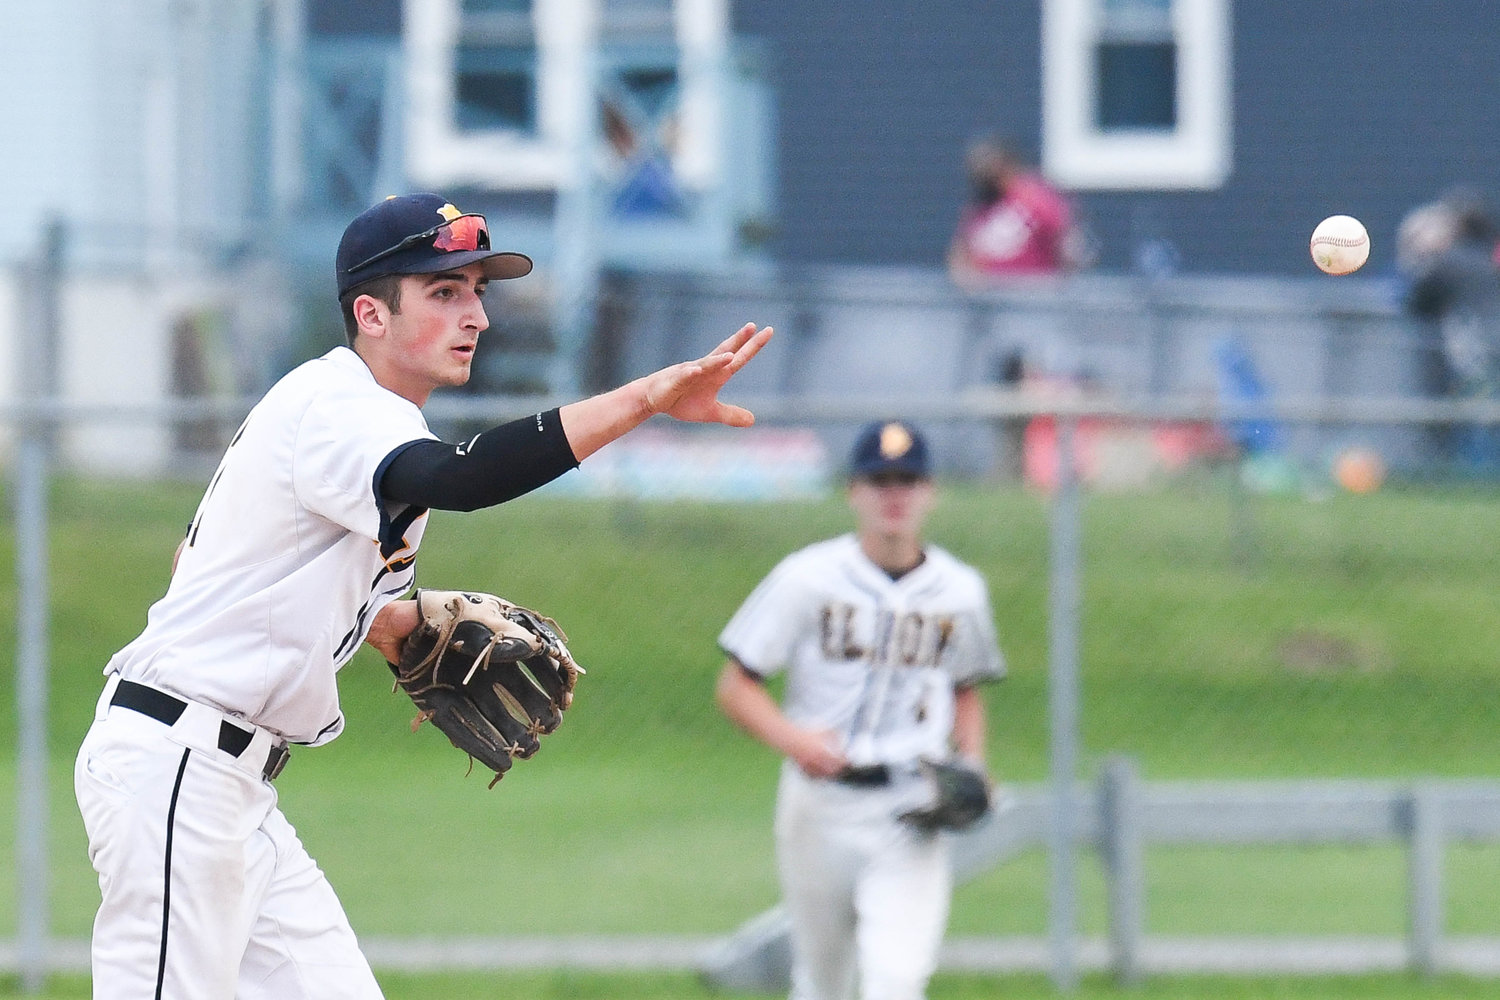 Ilion Post's Alan Meszler (7) tosses the ball to second base against Utica Post 229 on Wednesday.